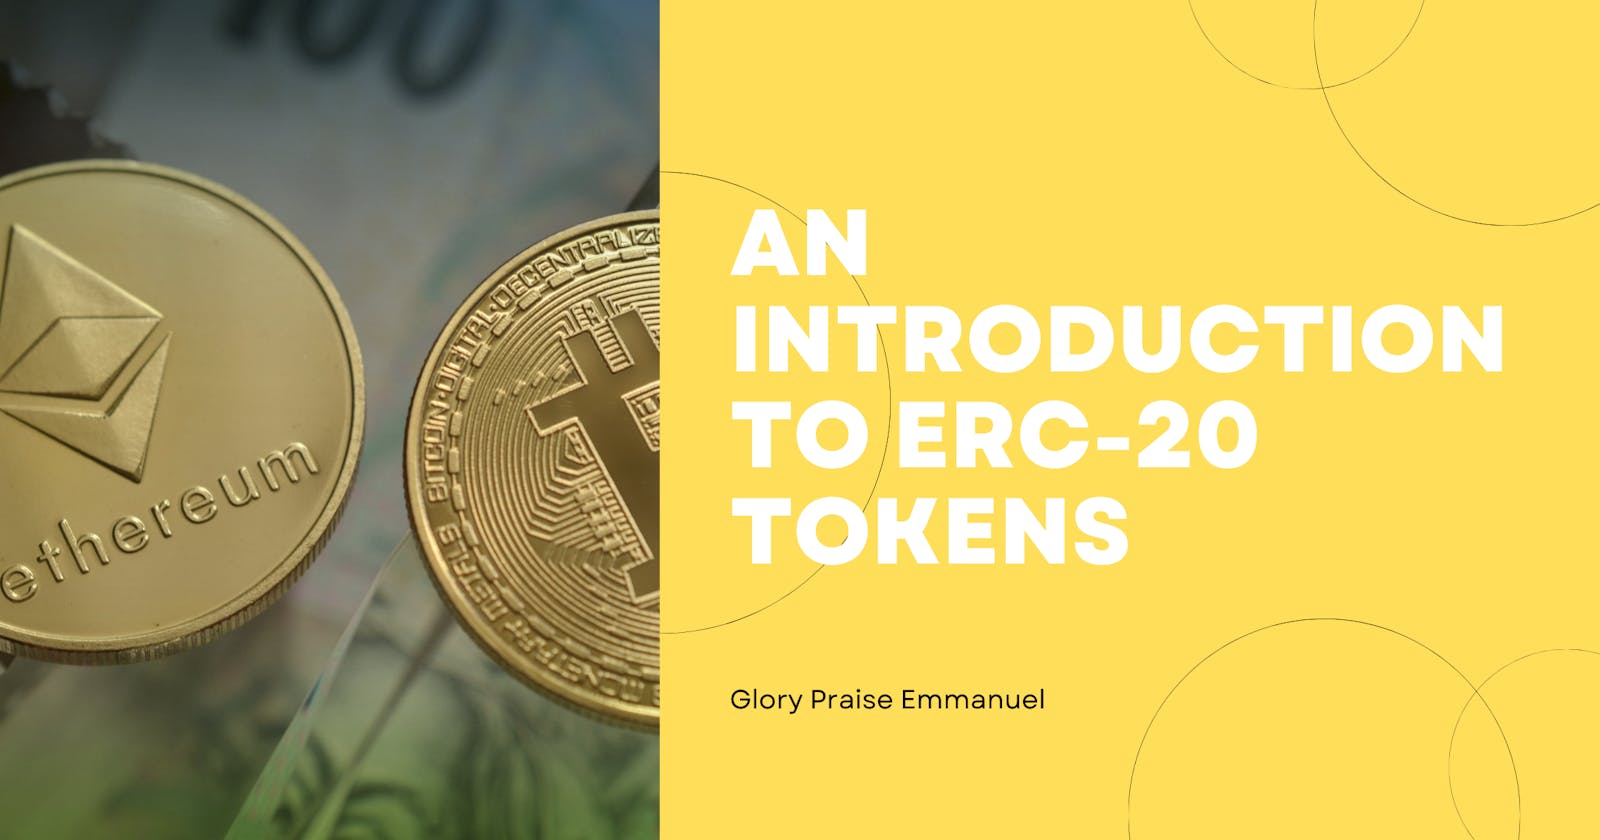 An Introduction to ERC-20 Tokens